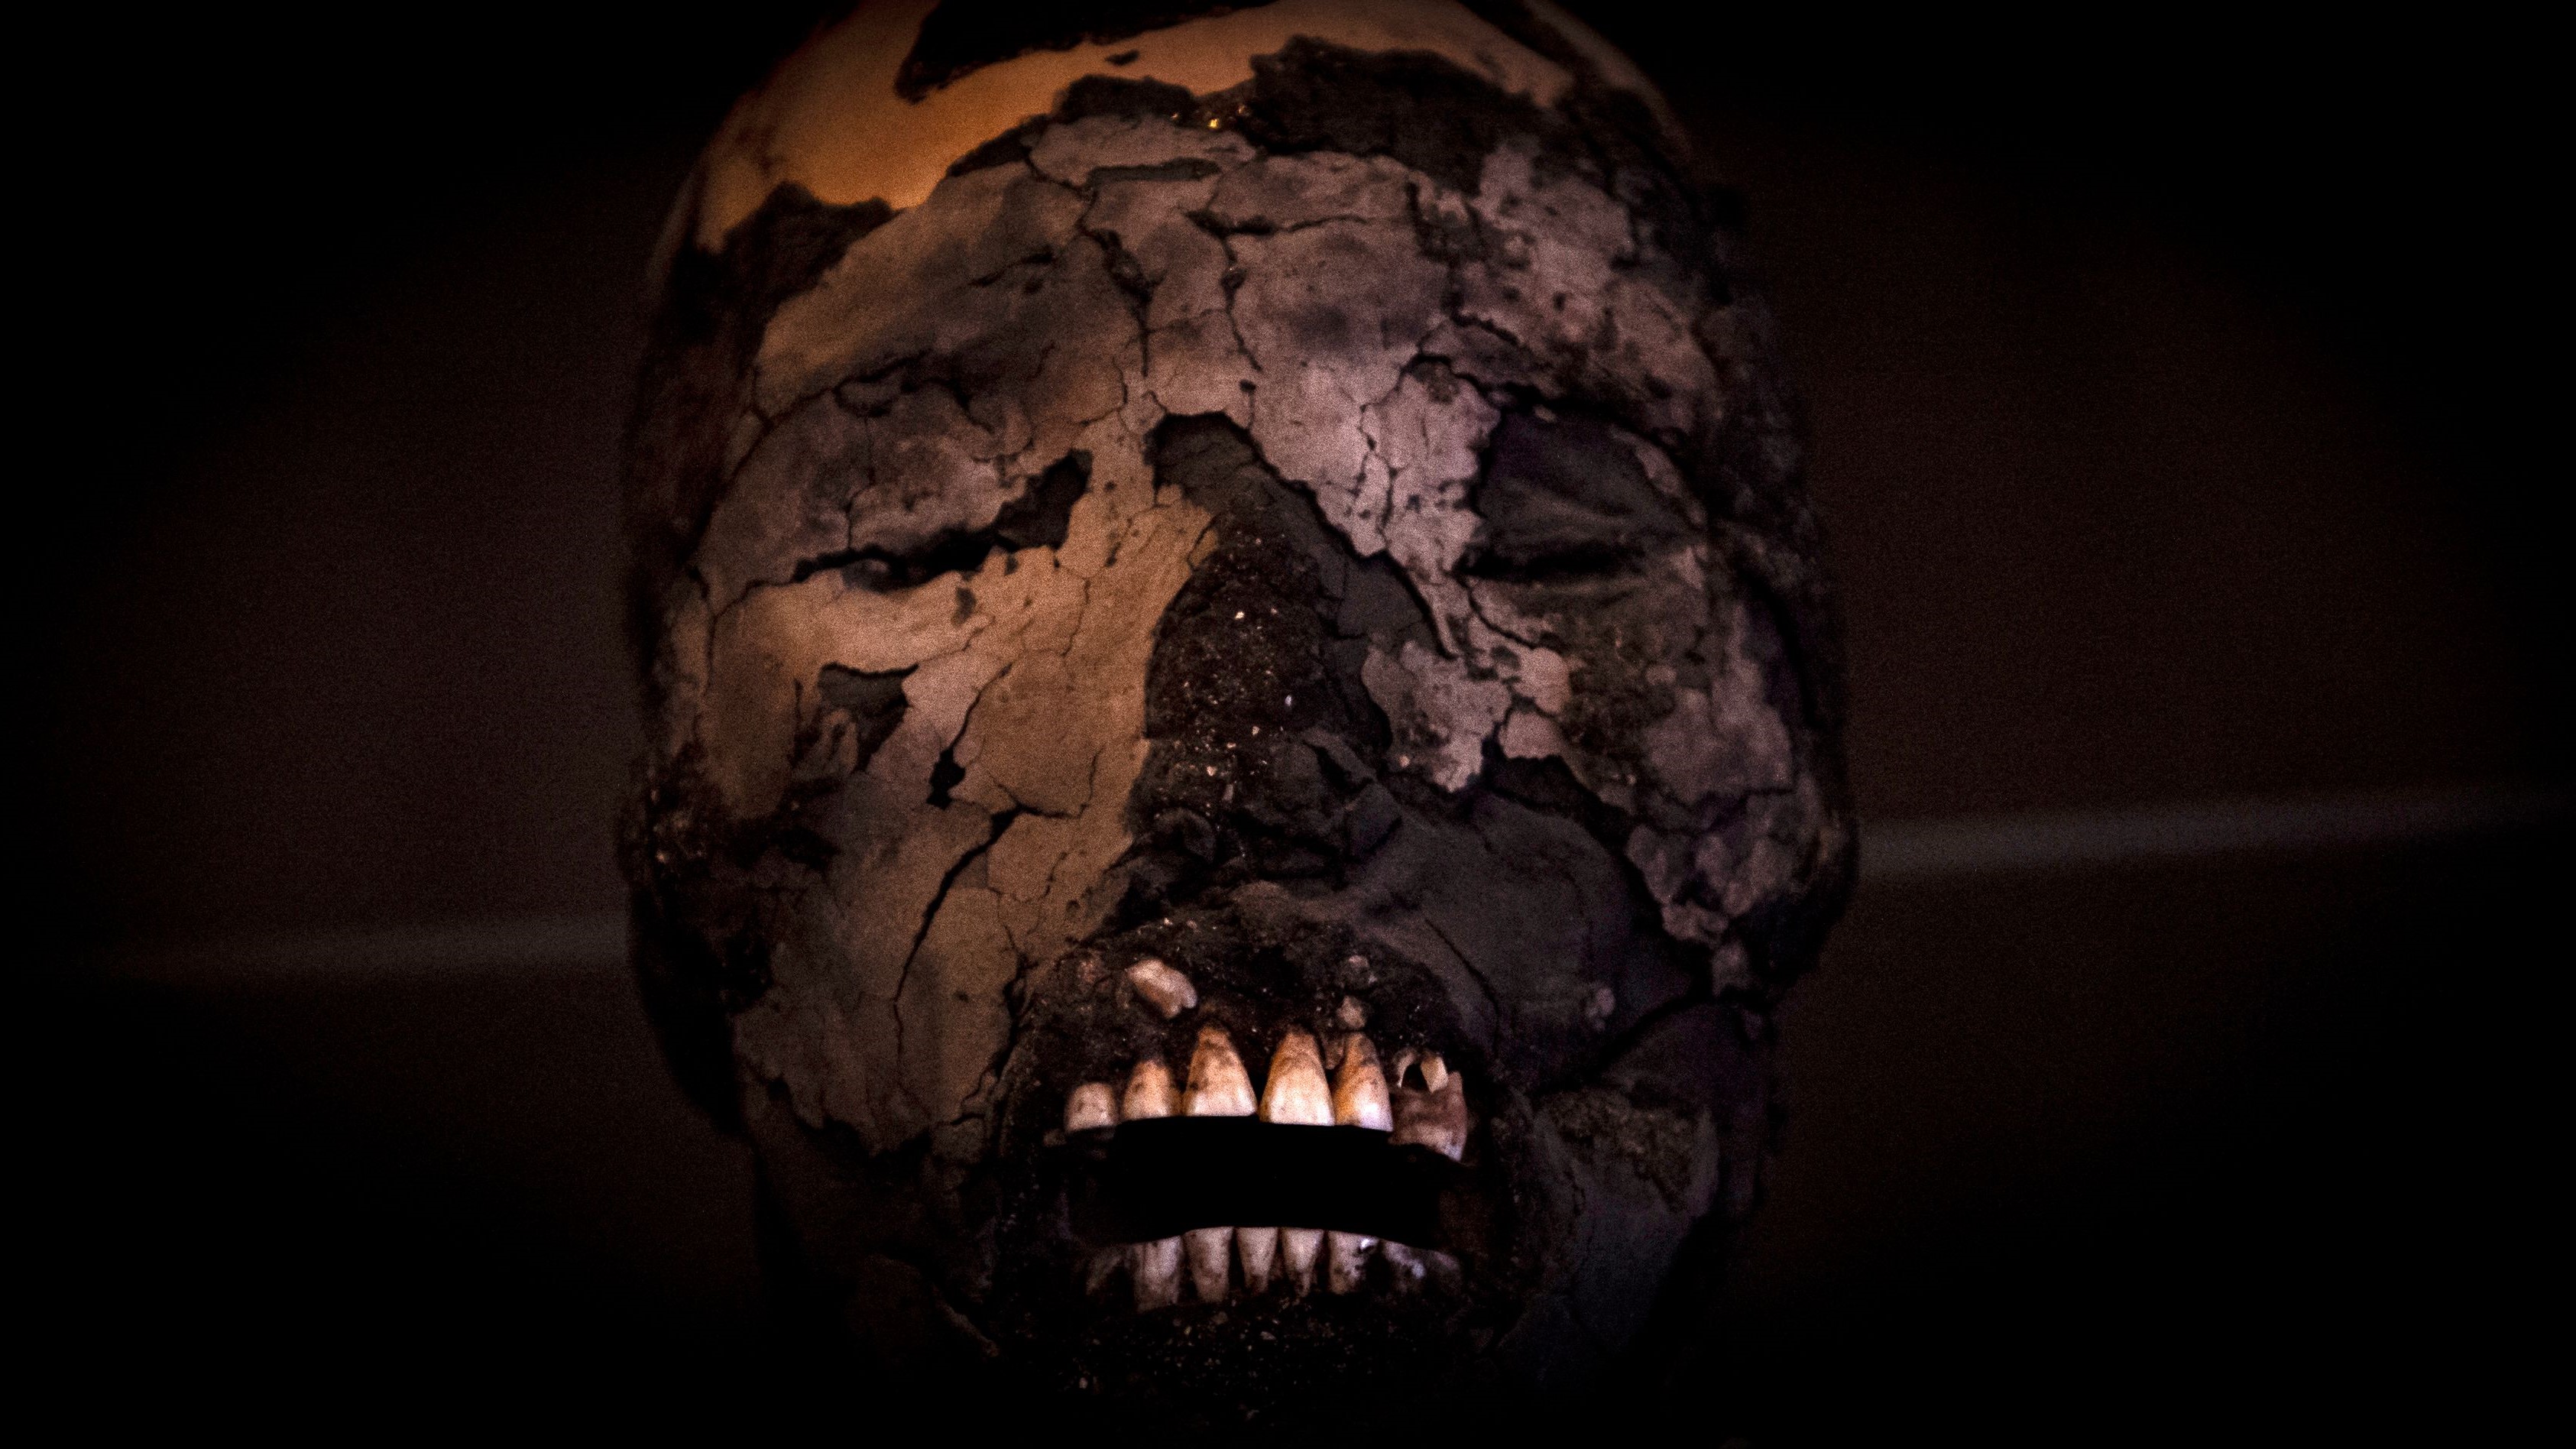 A Chinchorro mummy's face with teeth showing on a dark background